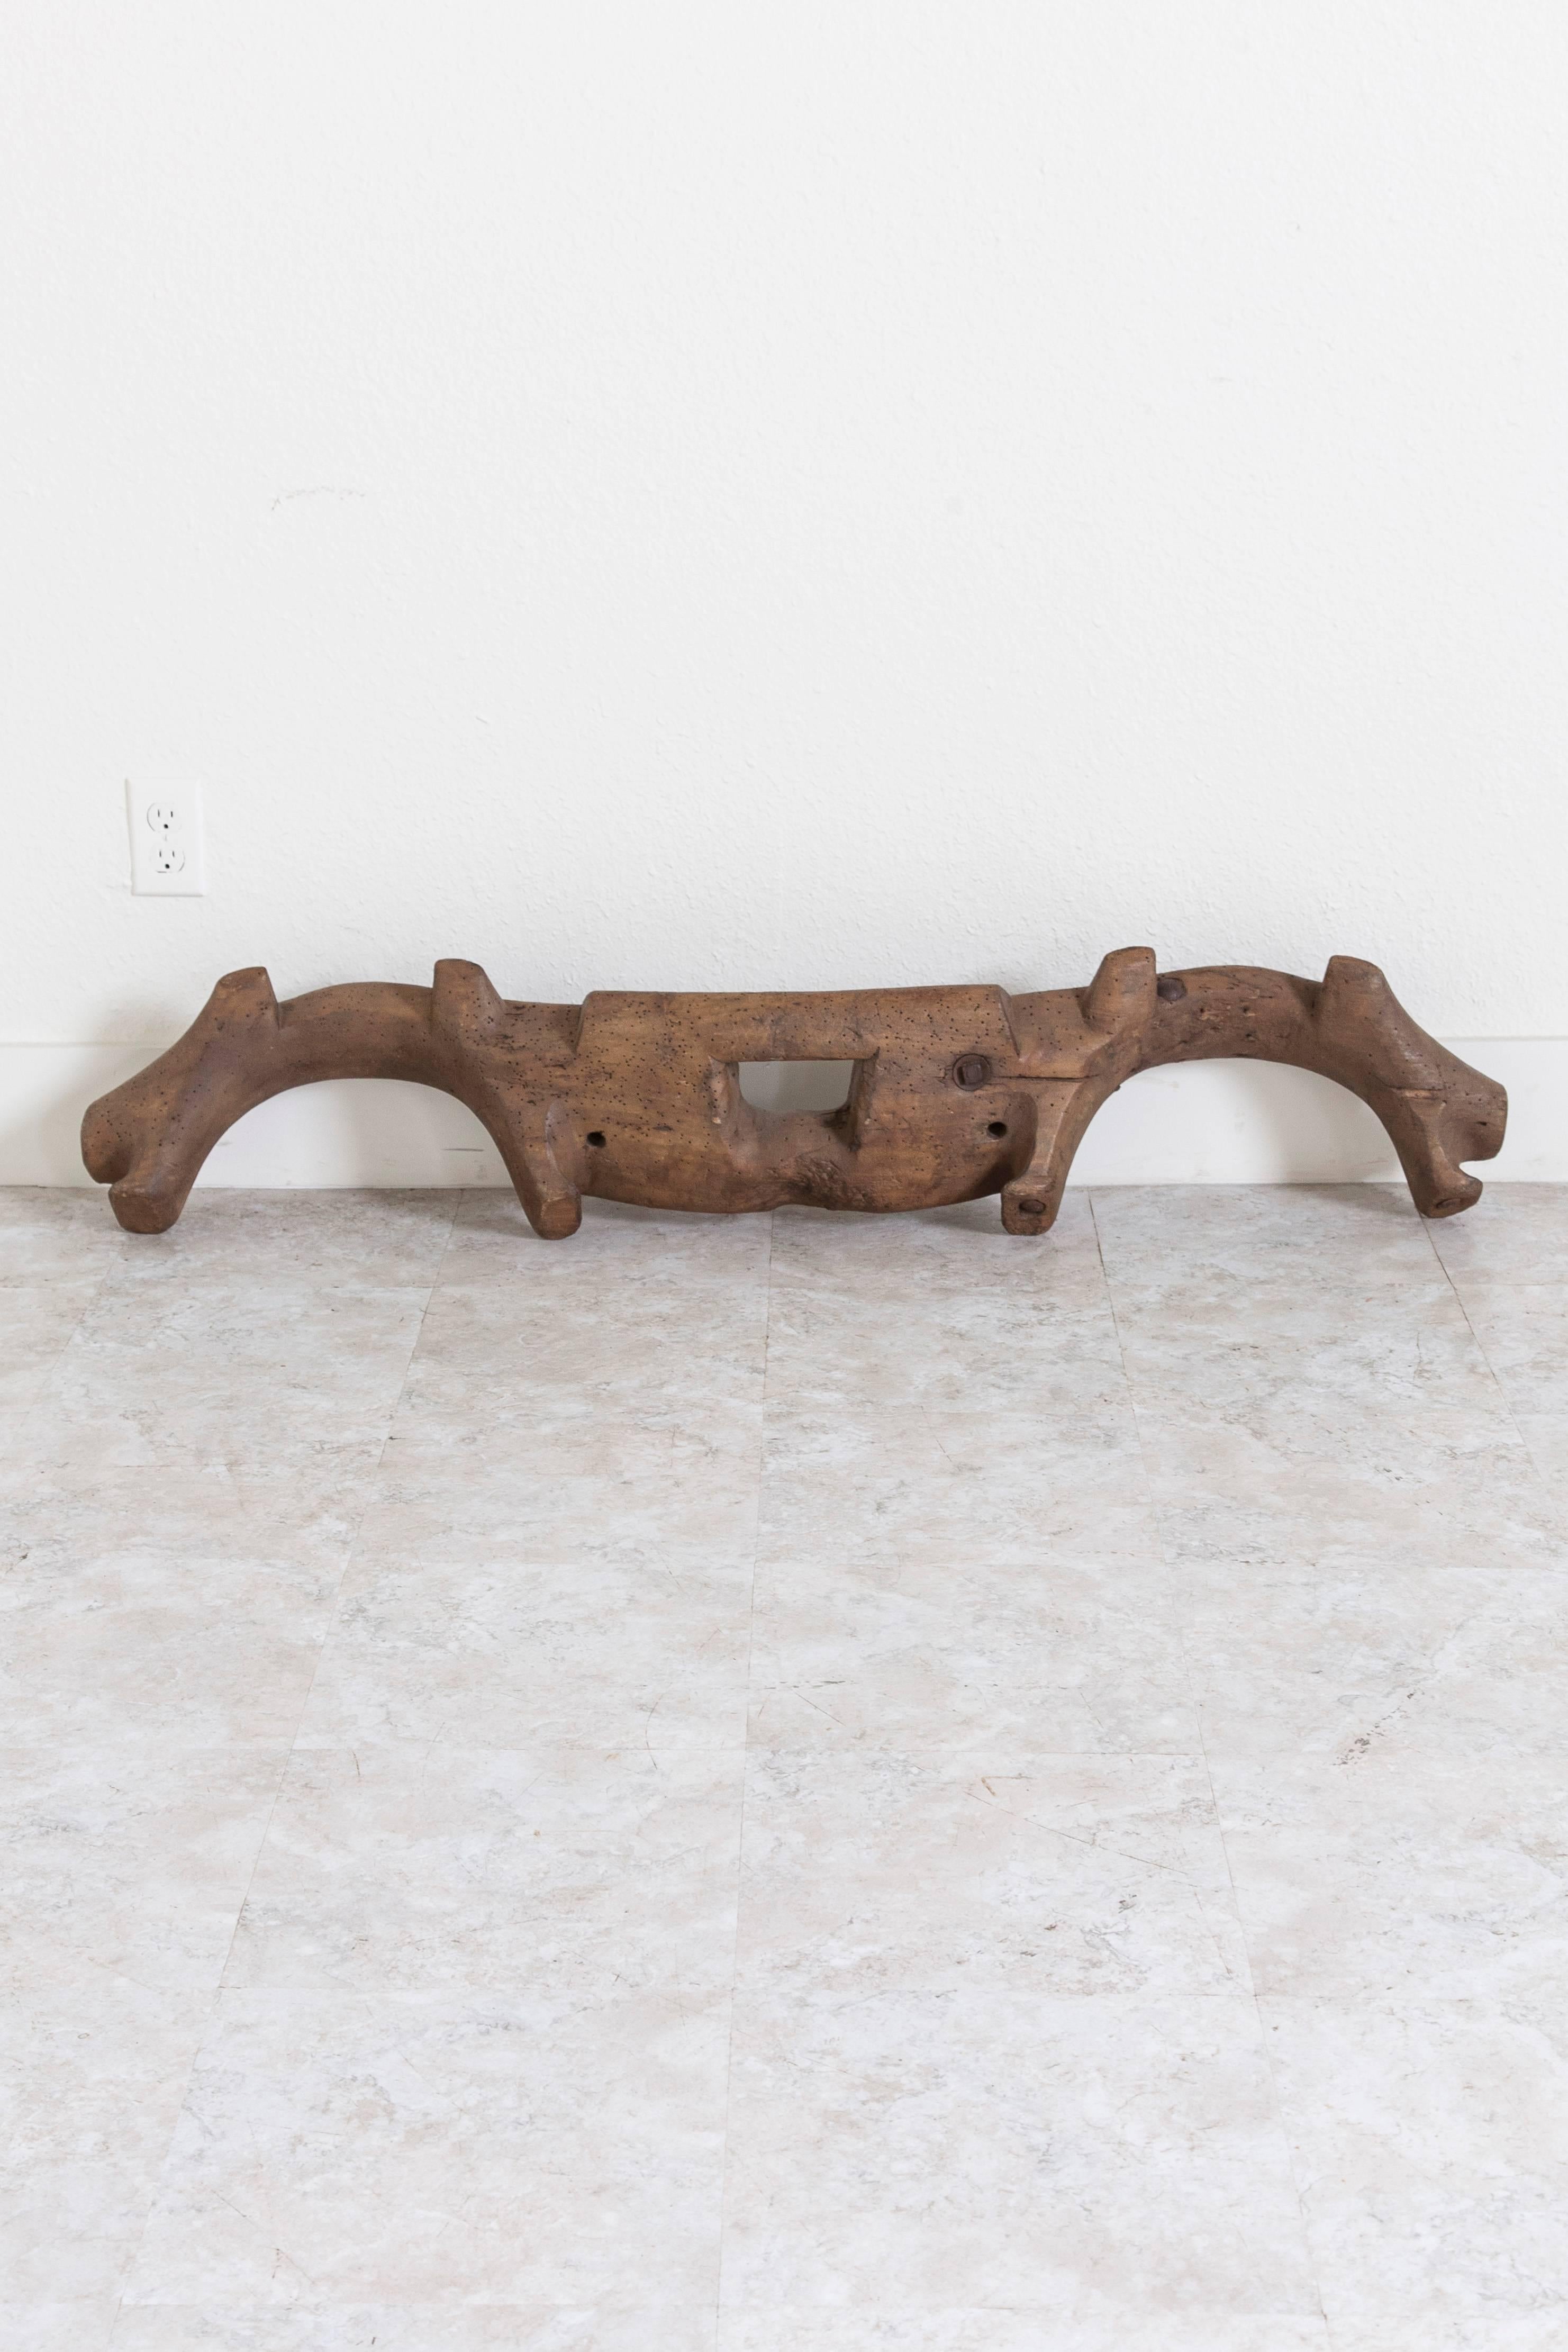 This rare handmade double oxen yoke was made from a single piece of wood in the mid-1800s in the Le Perche region of France. Created from beautifully aged wood with a rustic sculptural form, this yoke hangs easily from chain for display on a wall or